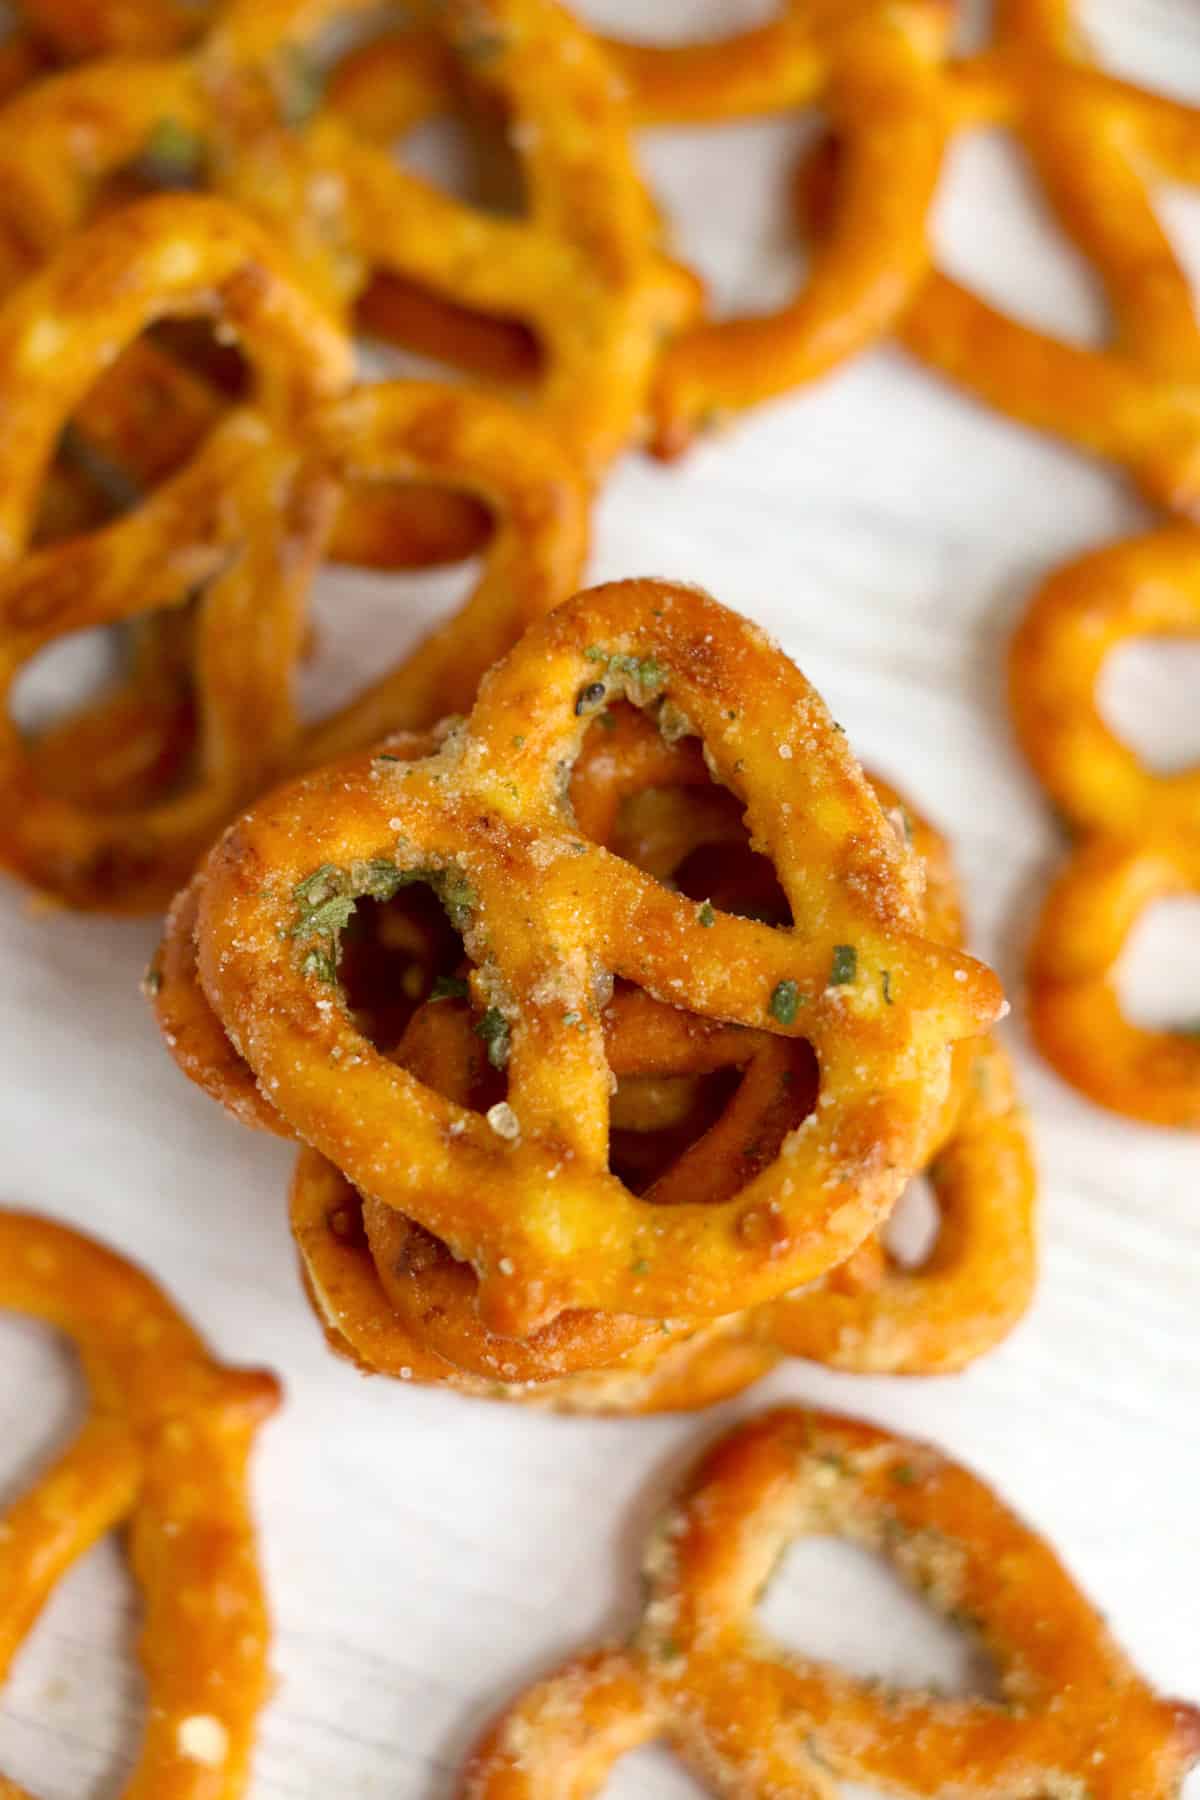 Ranch and garlic seasoned pretzels scatted on table.